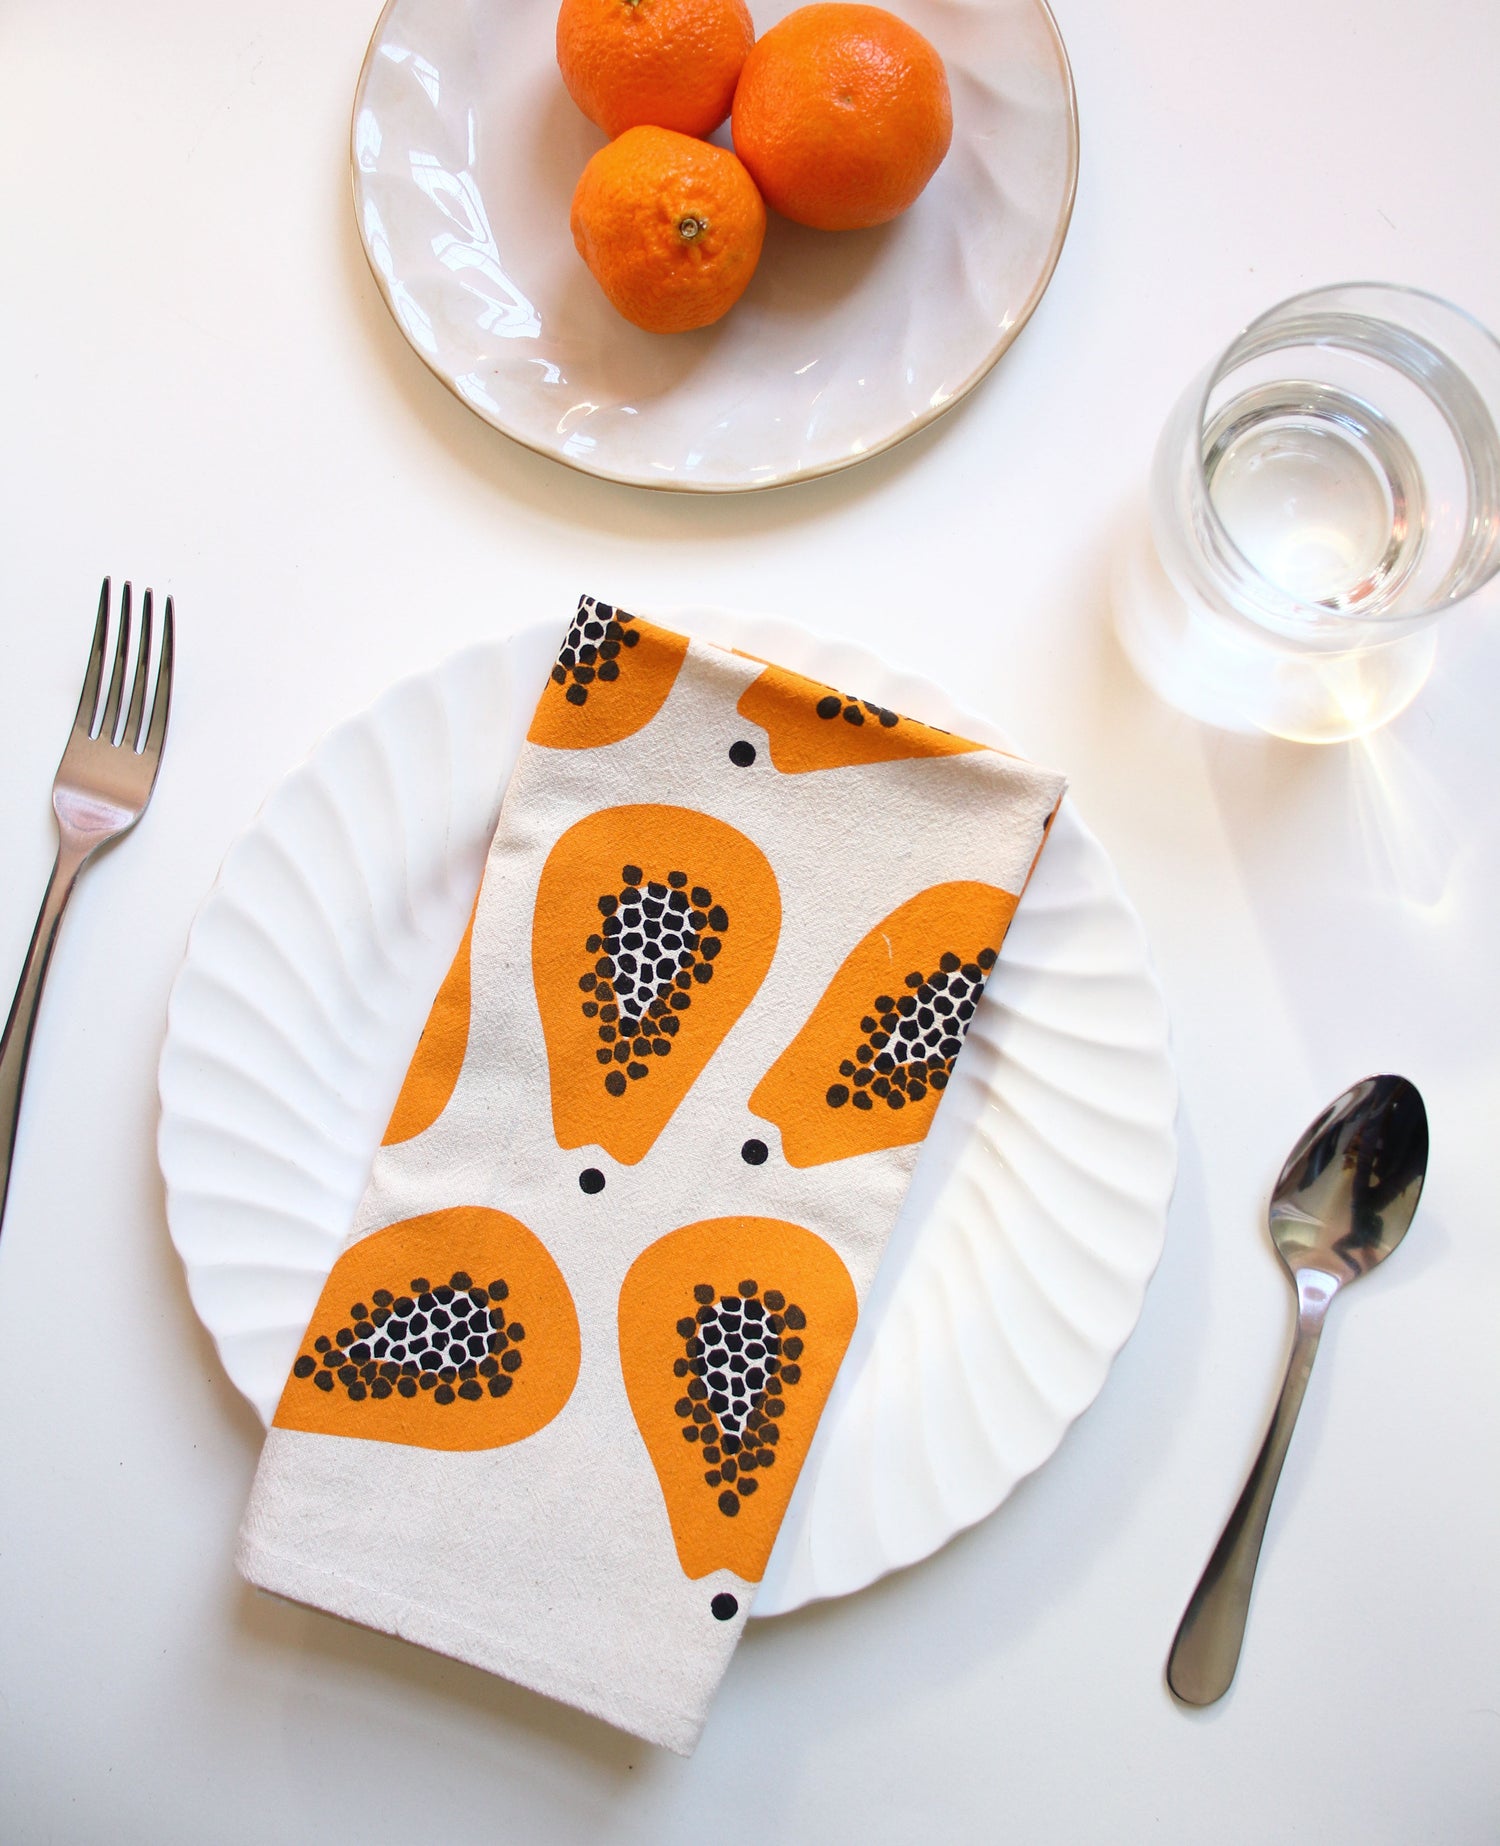 Folded Papaya Pattern Tea Towel on a table top with a plate of oranges